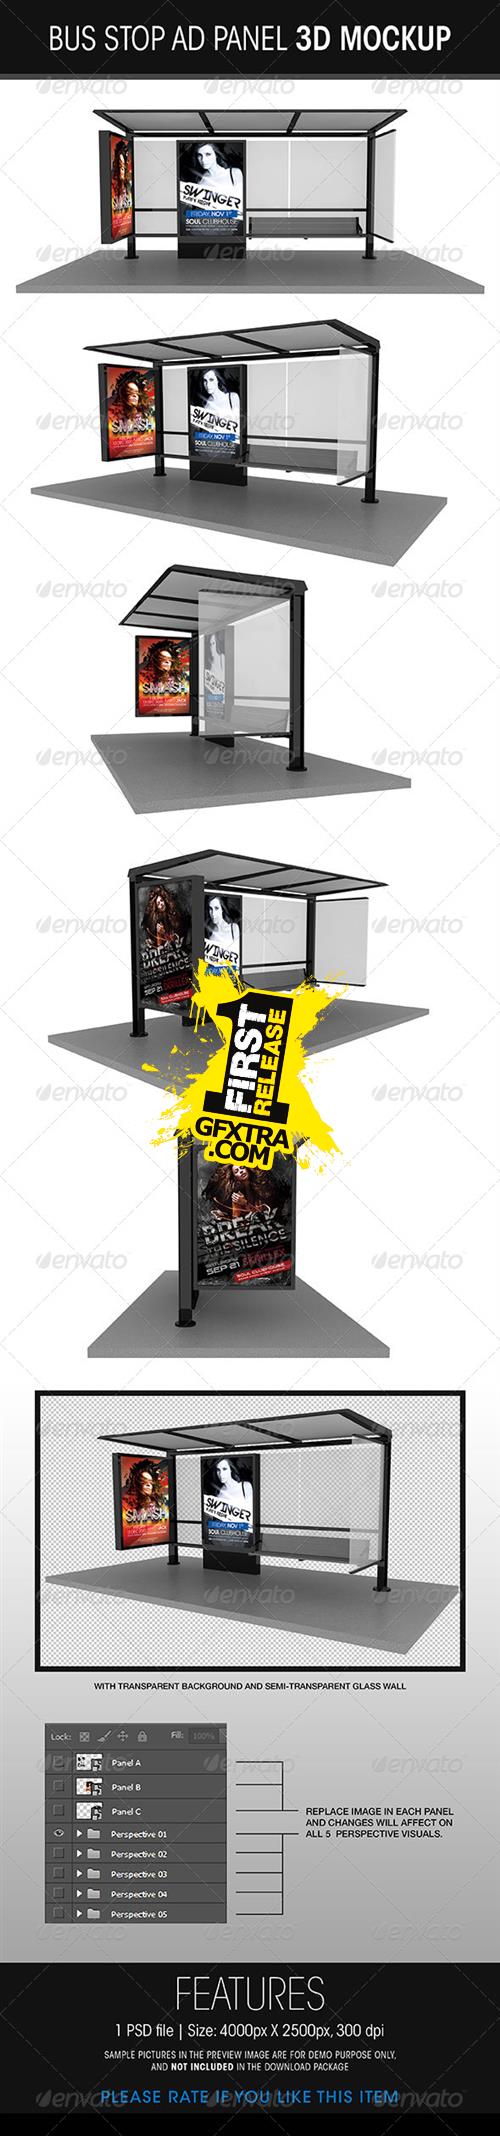 GraphicRiver - Bus Stop Ad Panel 3D Mockup